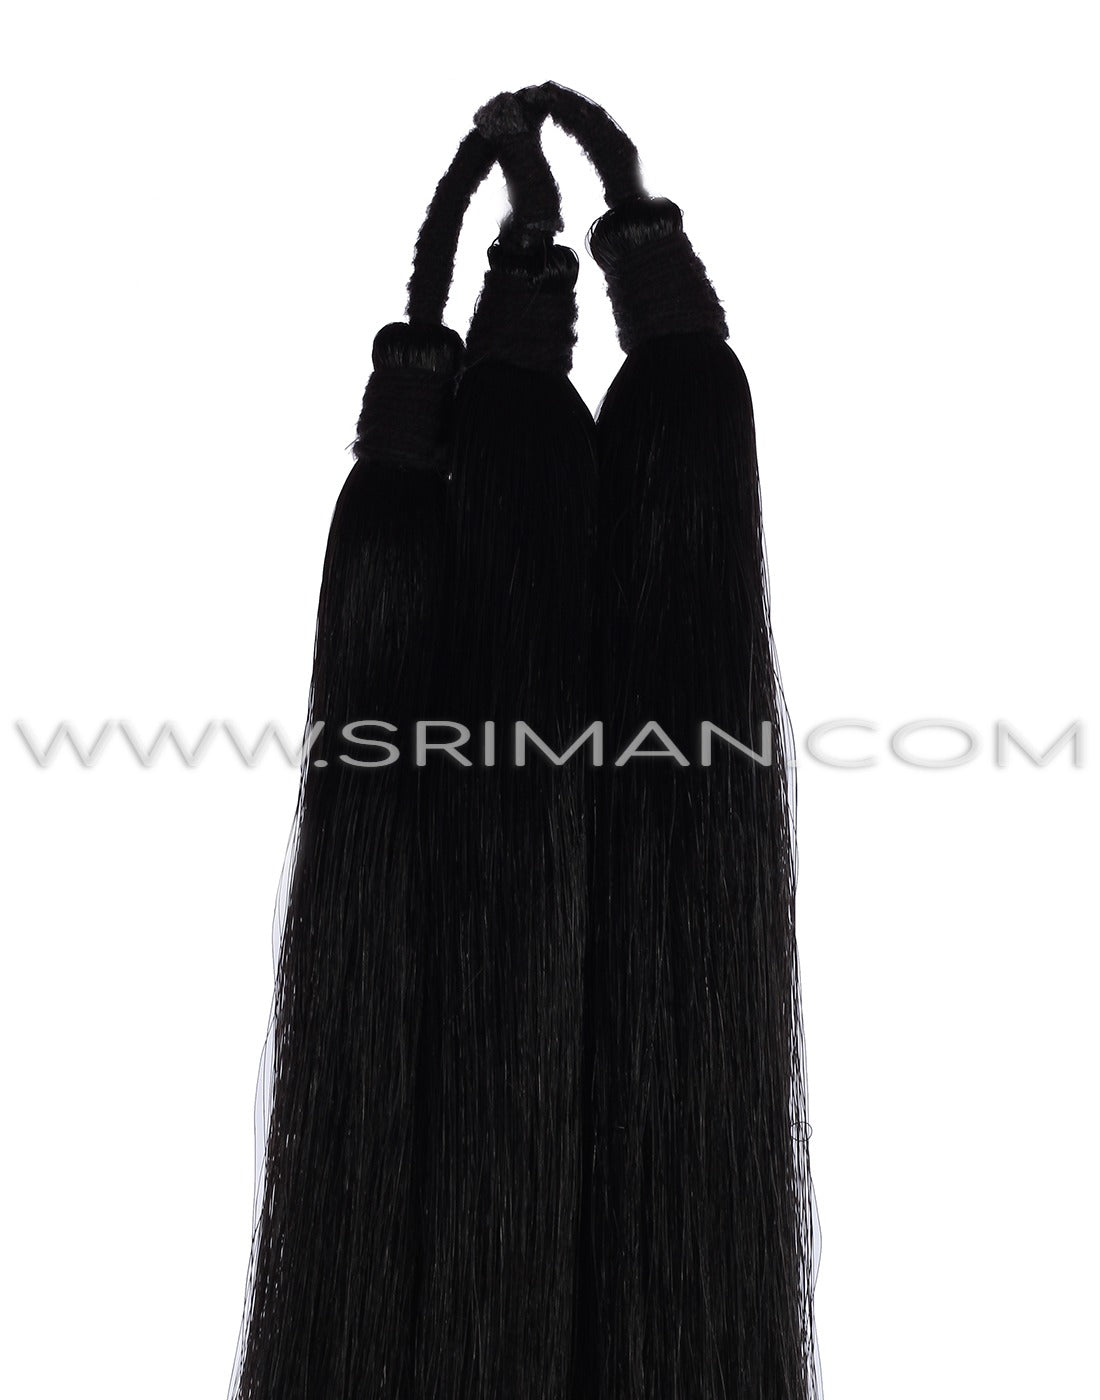 SRIMAN THICK HAIR EXTENSION